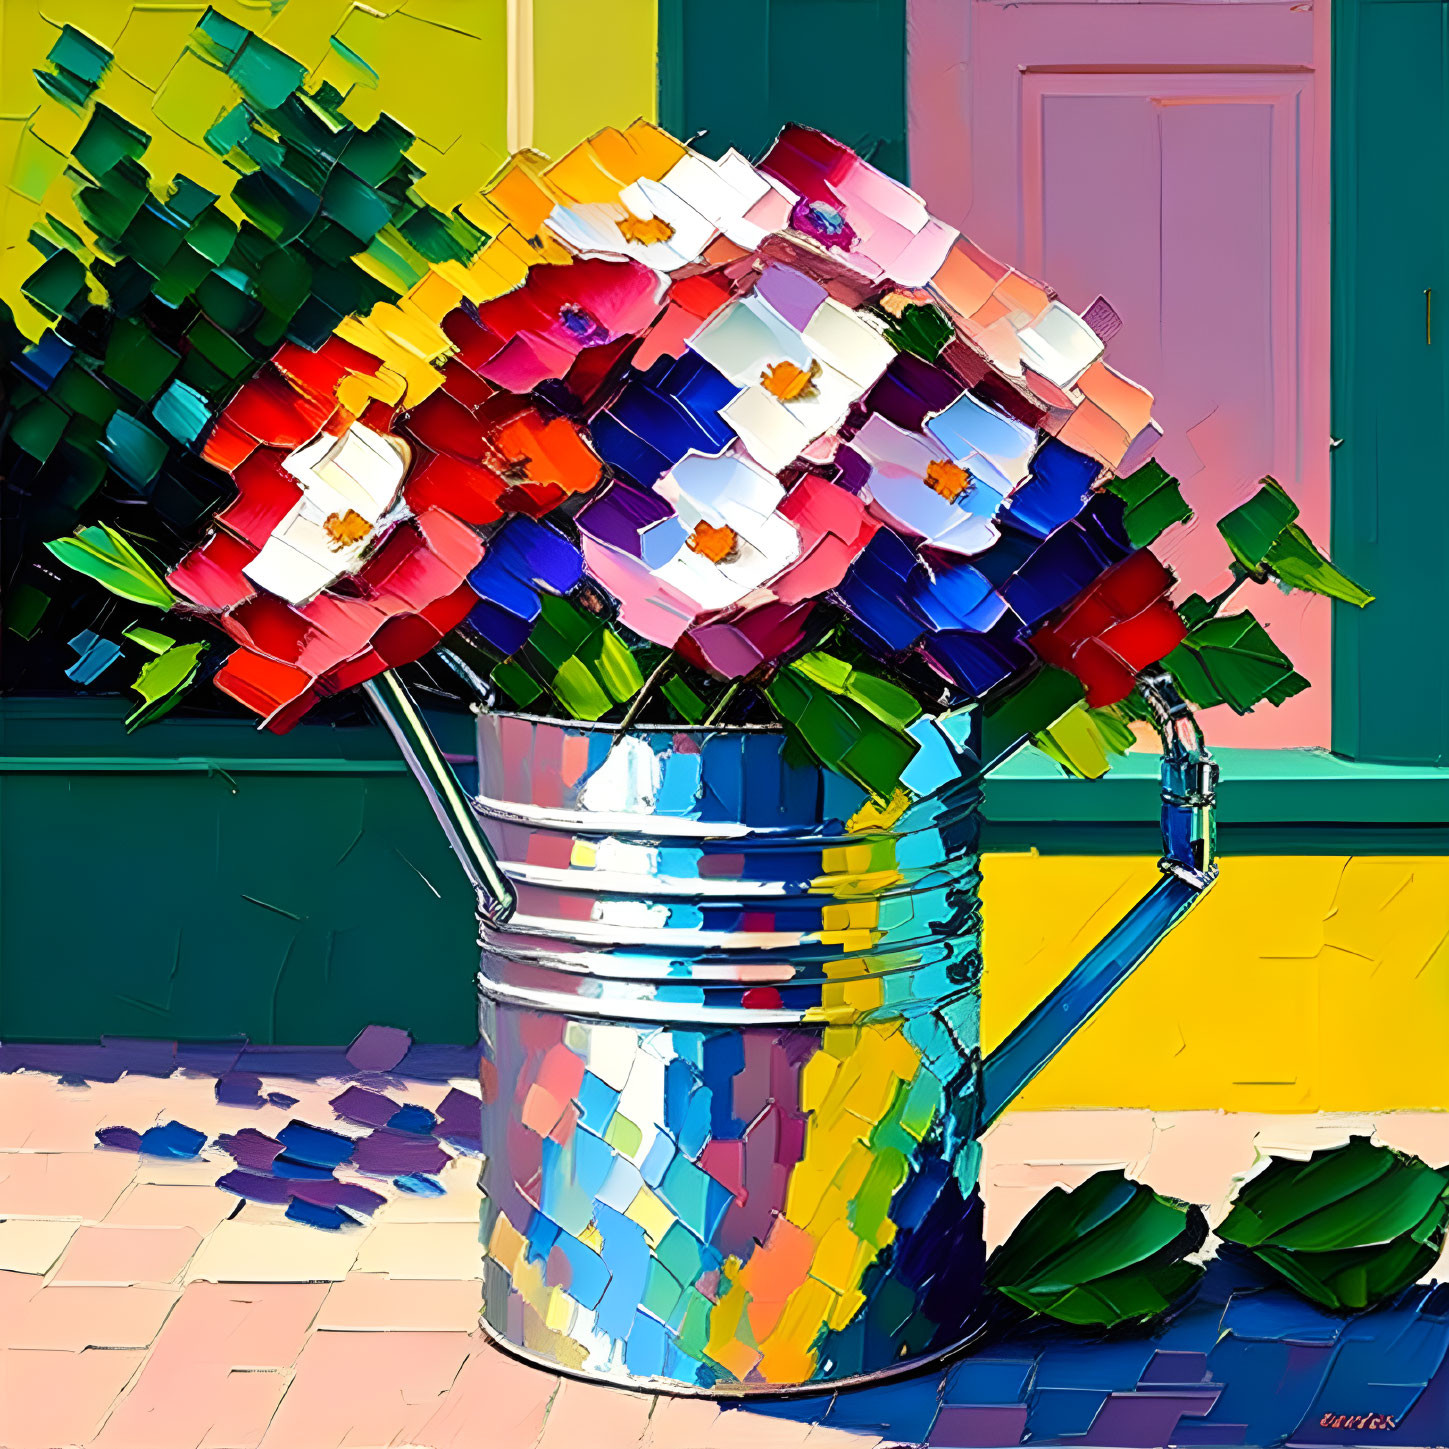 Colorful Cubist-style Painting: Flowers in Silver Watering Can on Yellow and Green Background